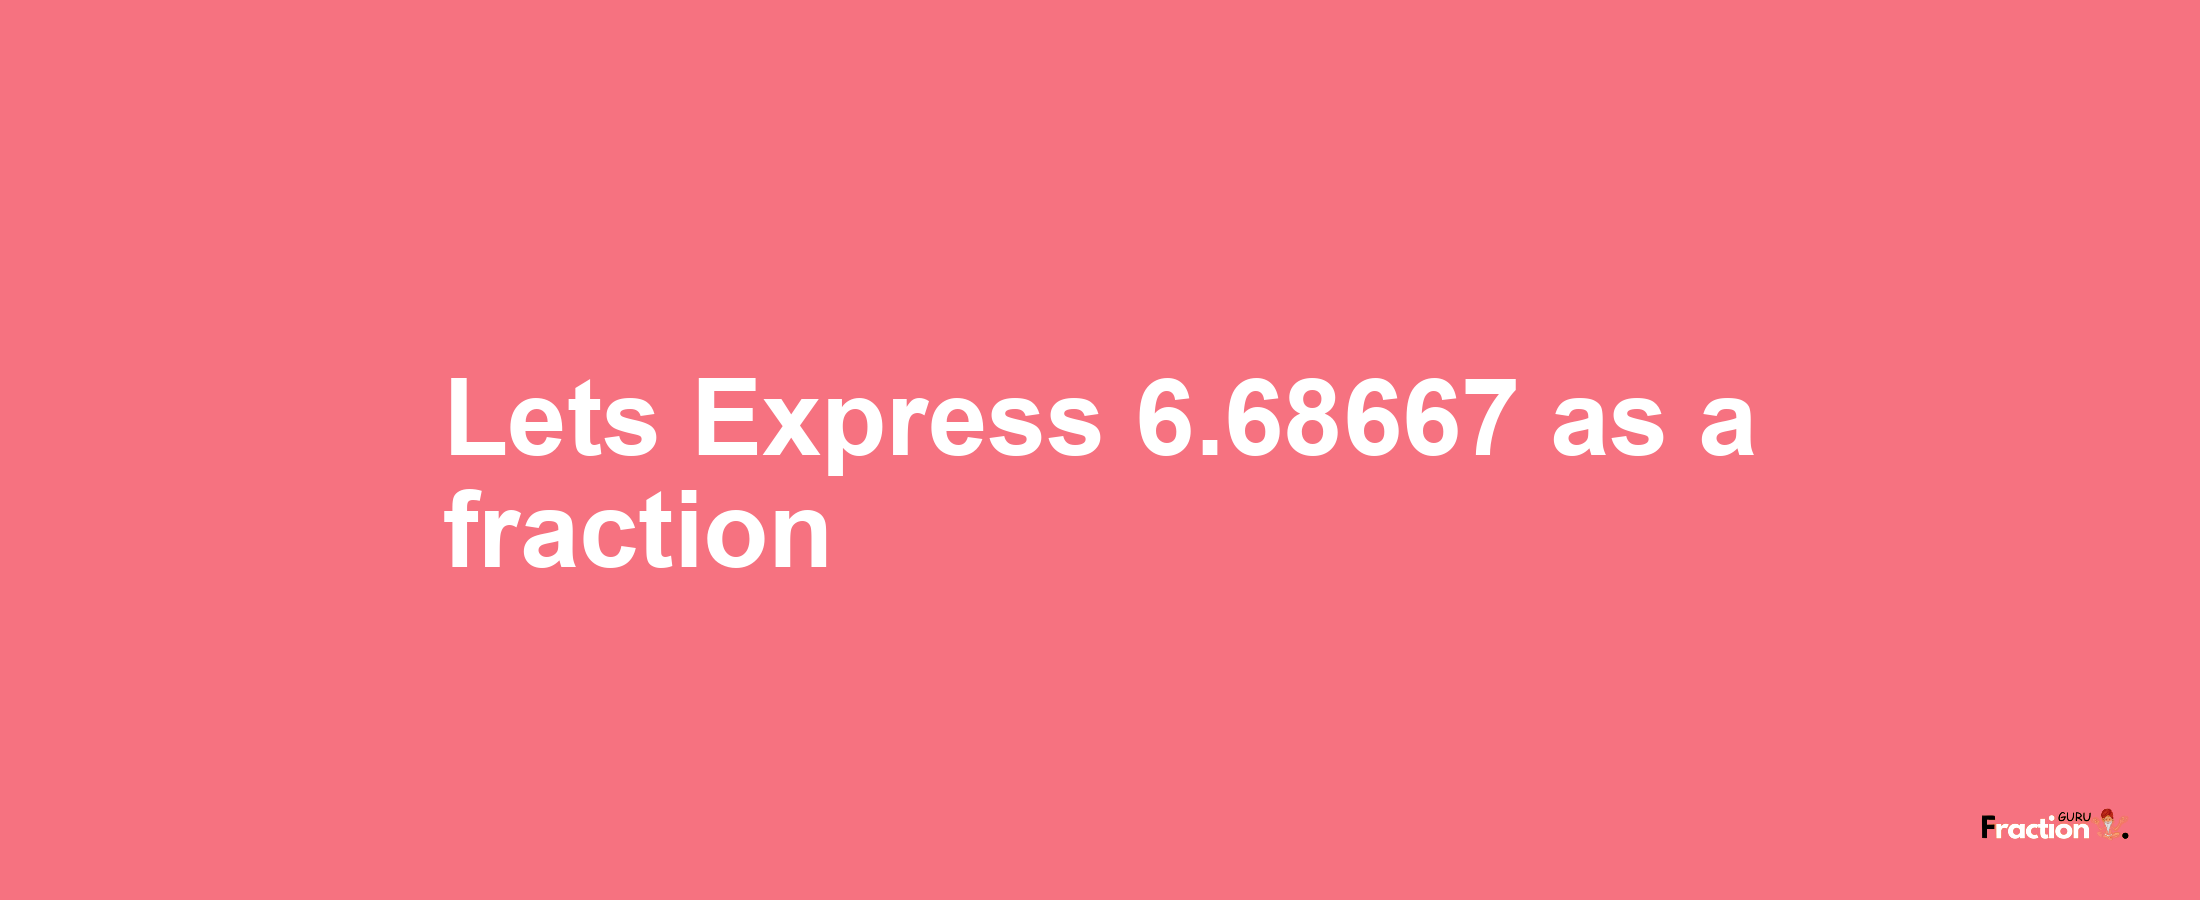 Lets Express 6.68667 as afraction